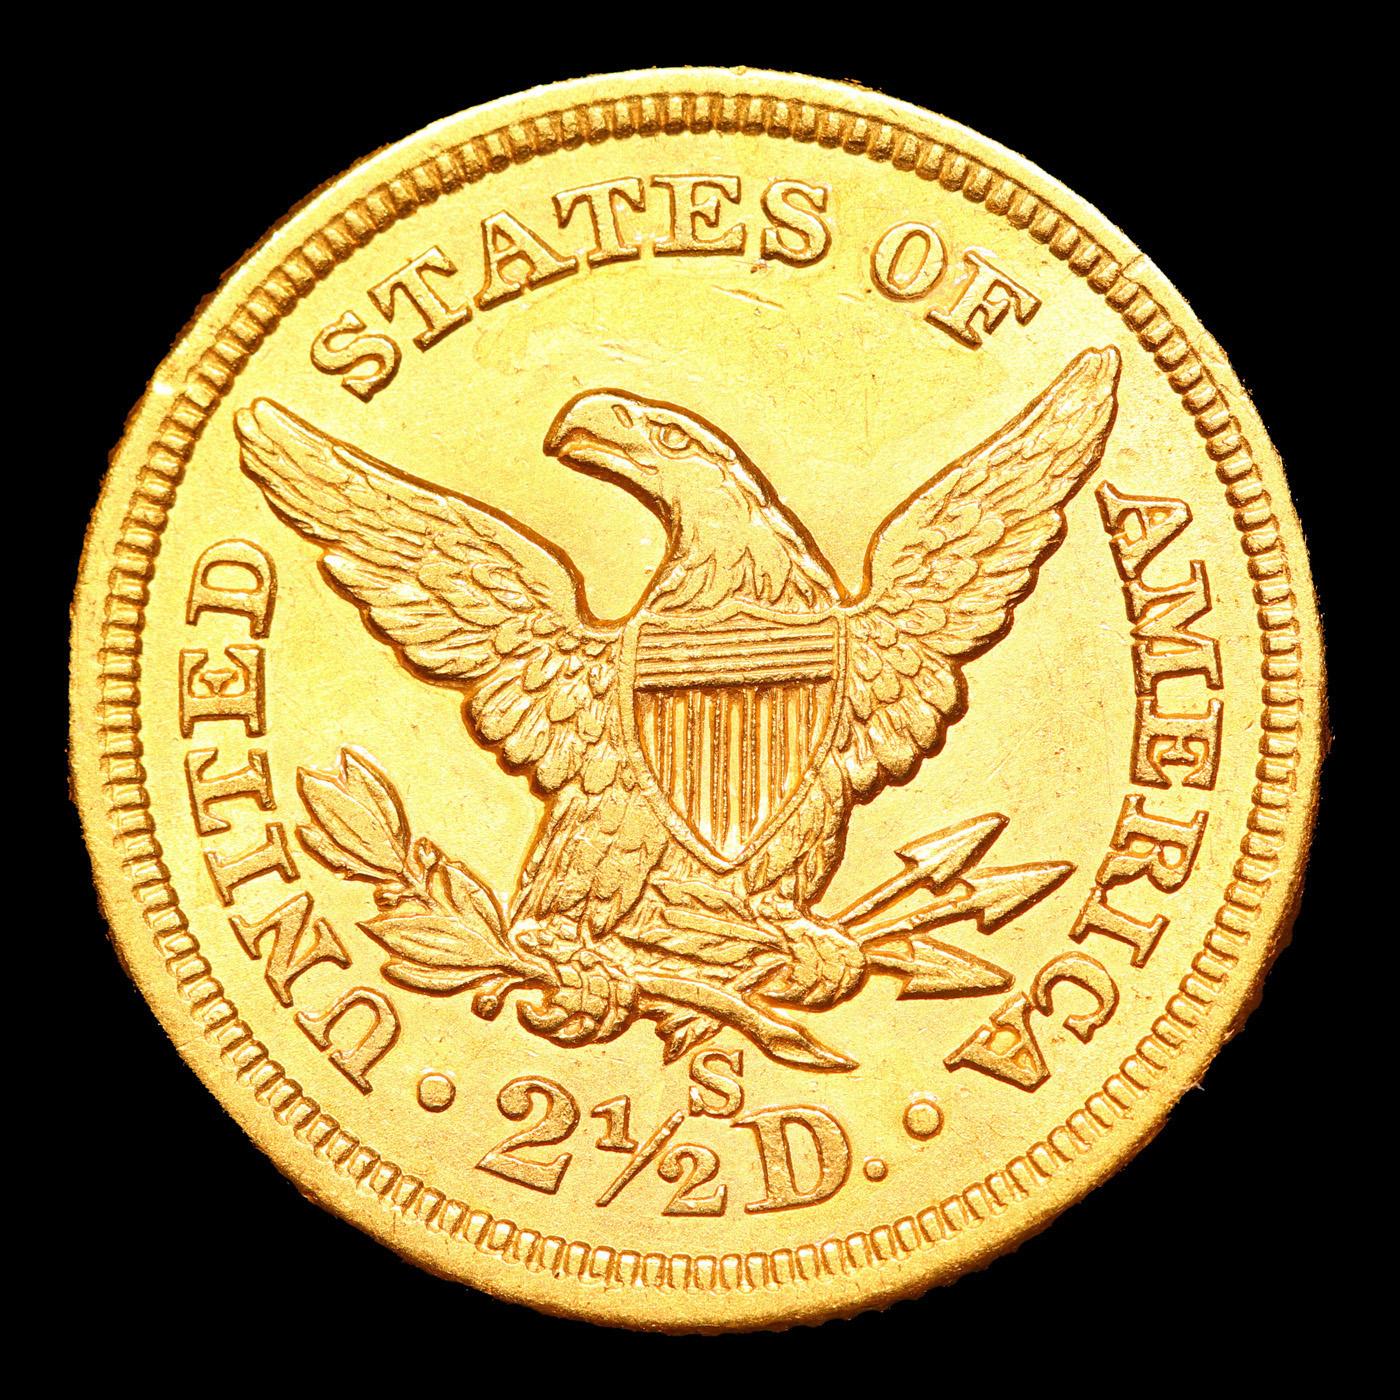 ***Auction Highlight*** 1856-s Gold Liberty Quarter Eagle $2 1/2 Graded ms62 By SEGS (fc)